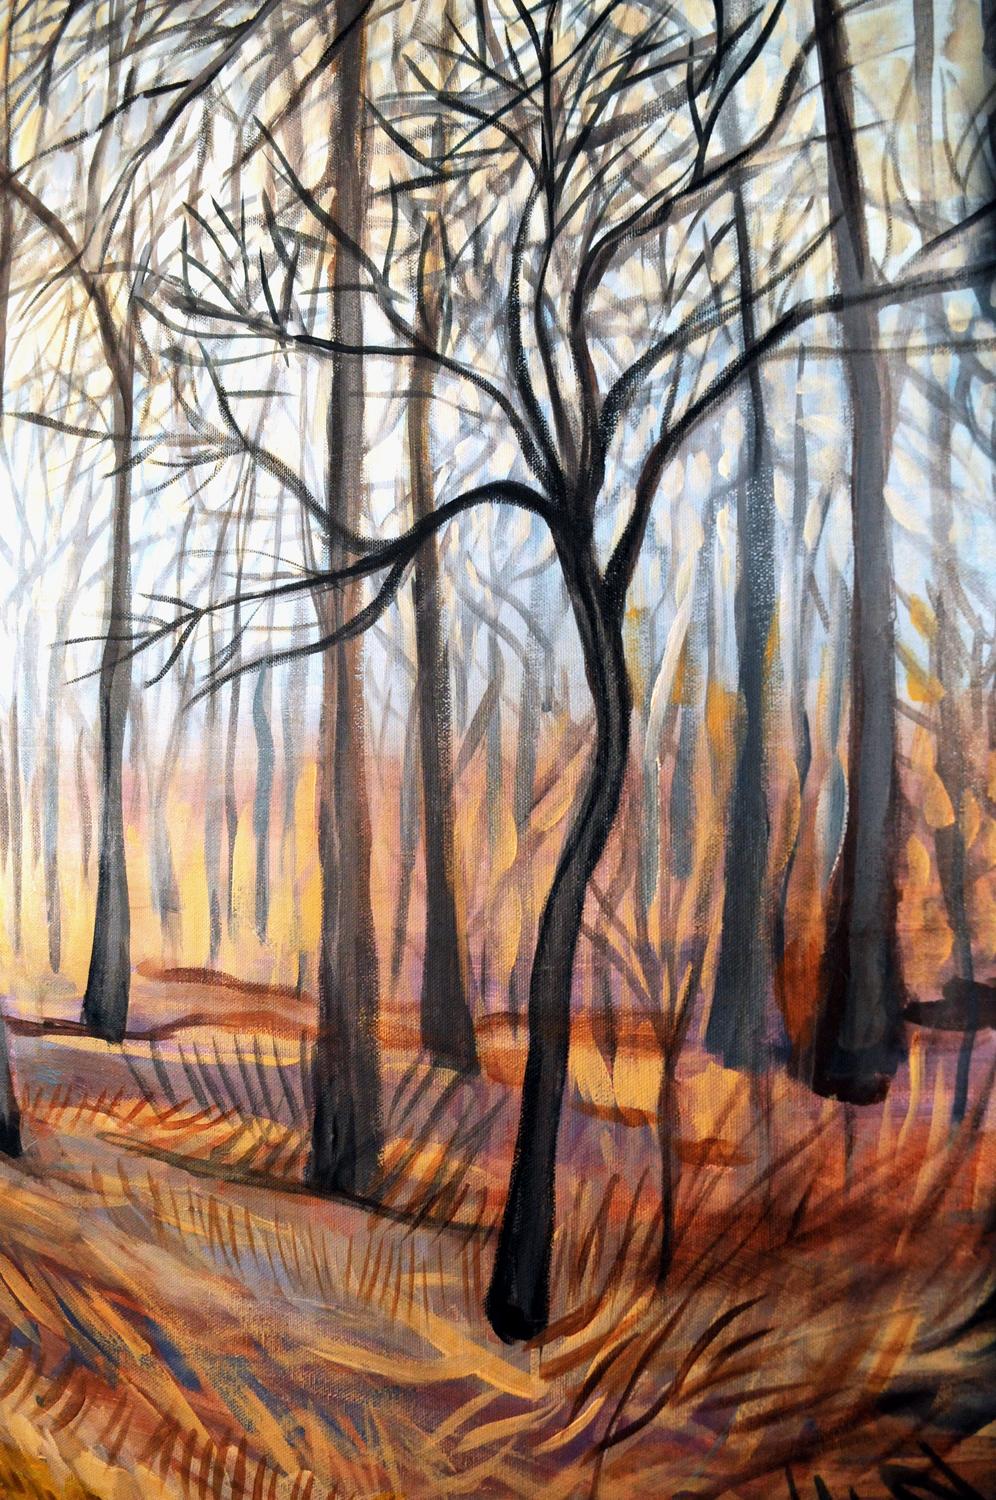 Winter Woods, Original Painting - Abstract Expressionist Art by Kira Yustak